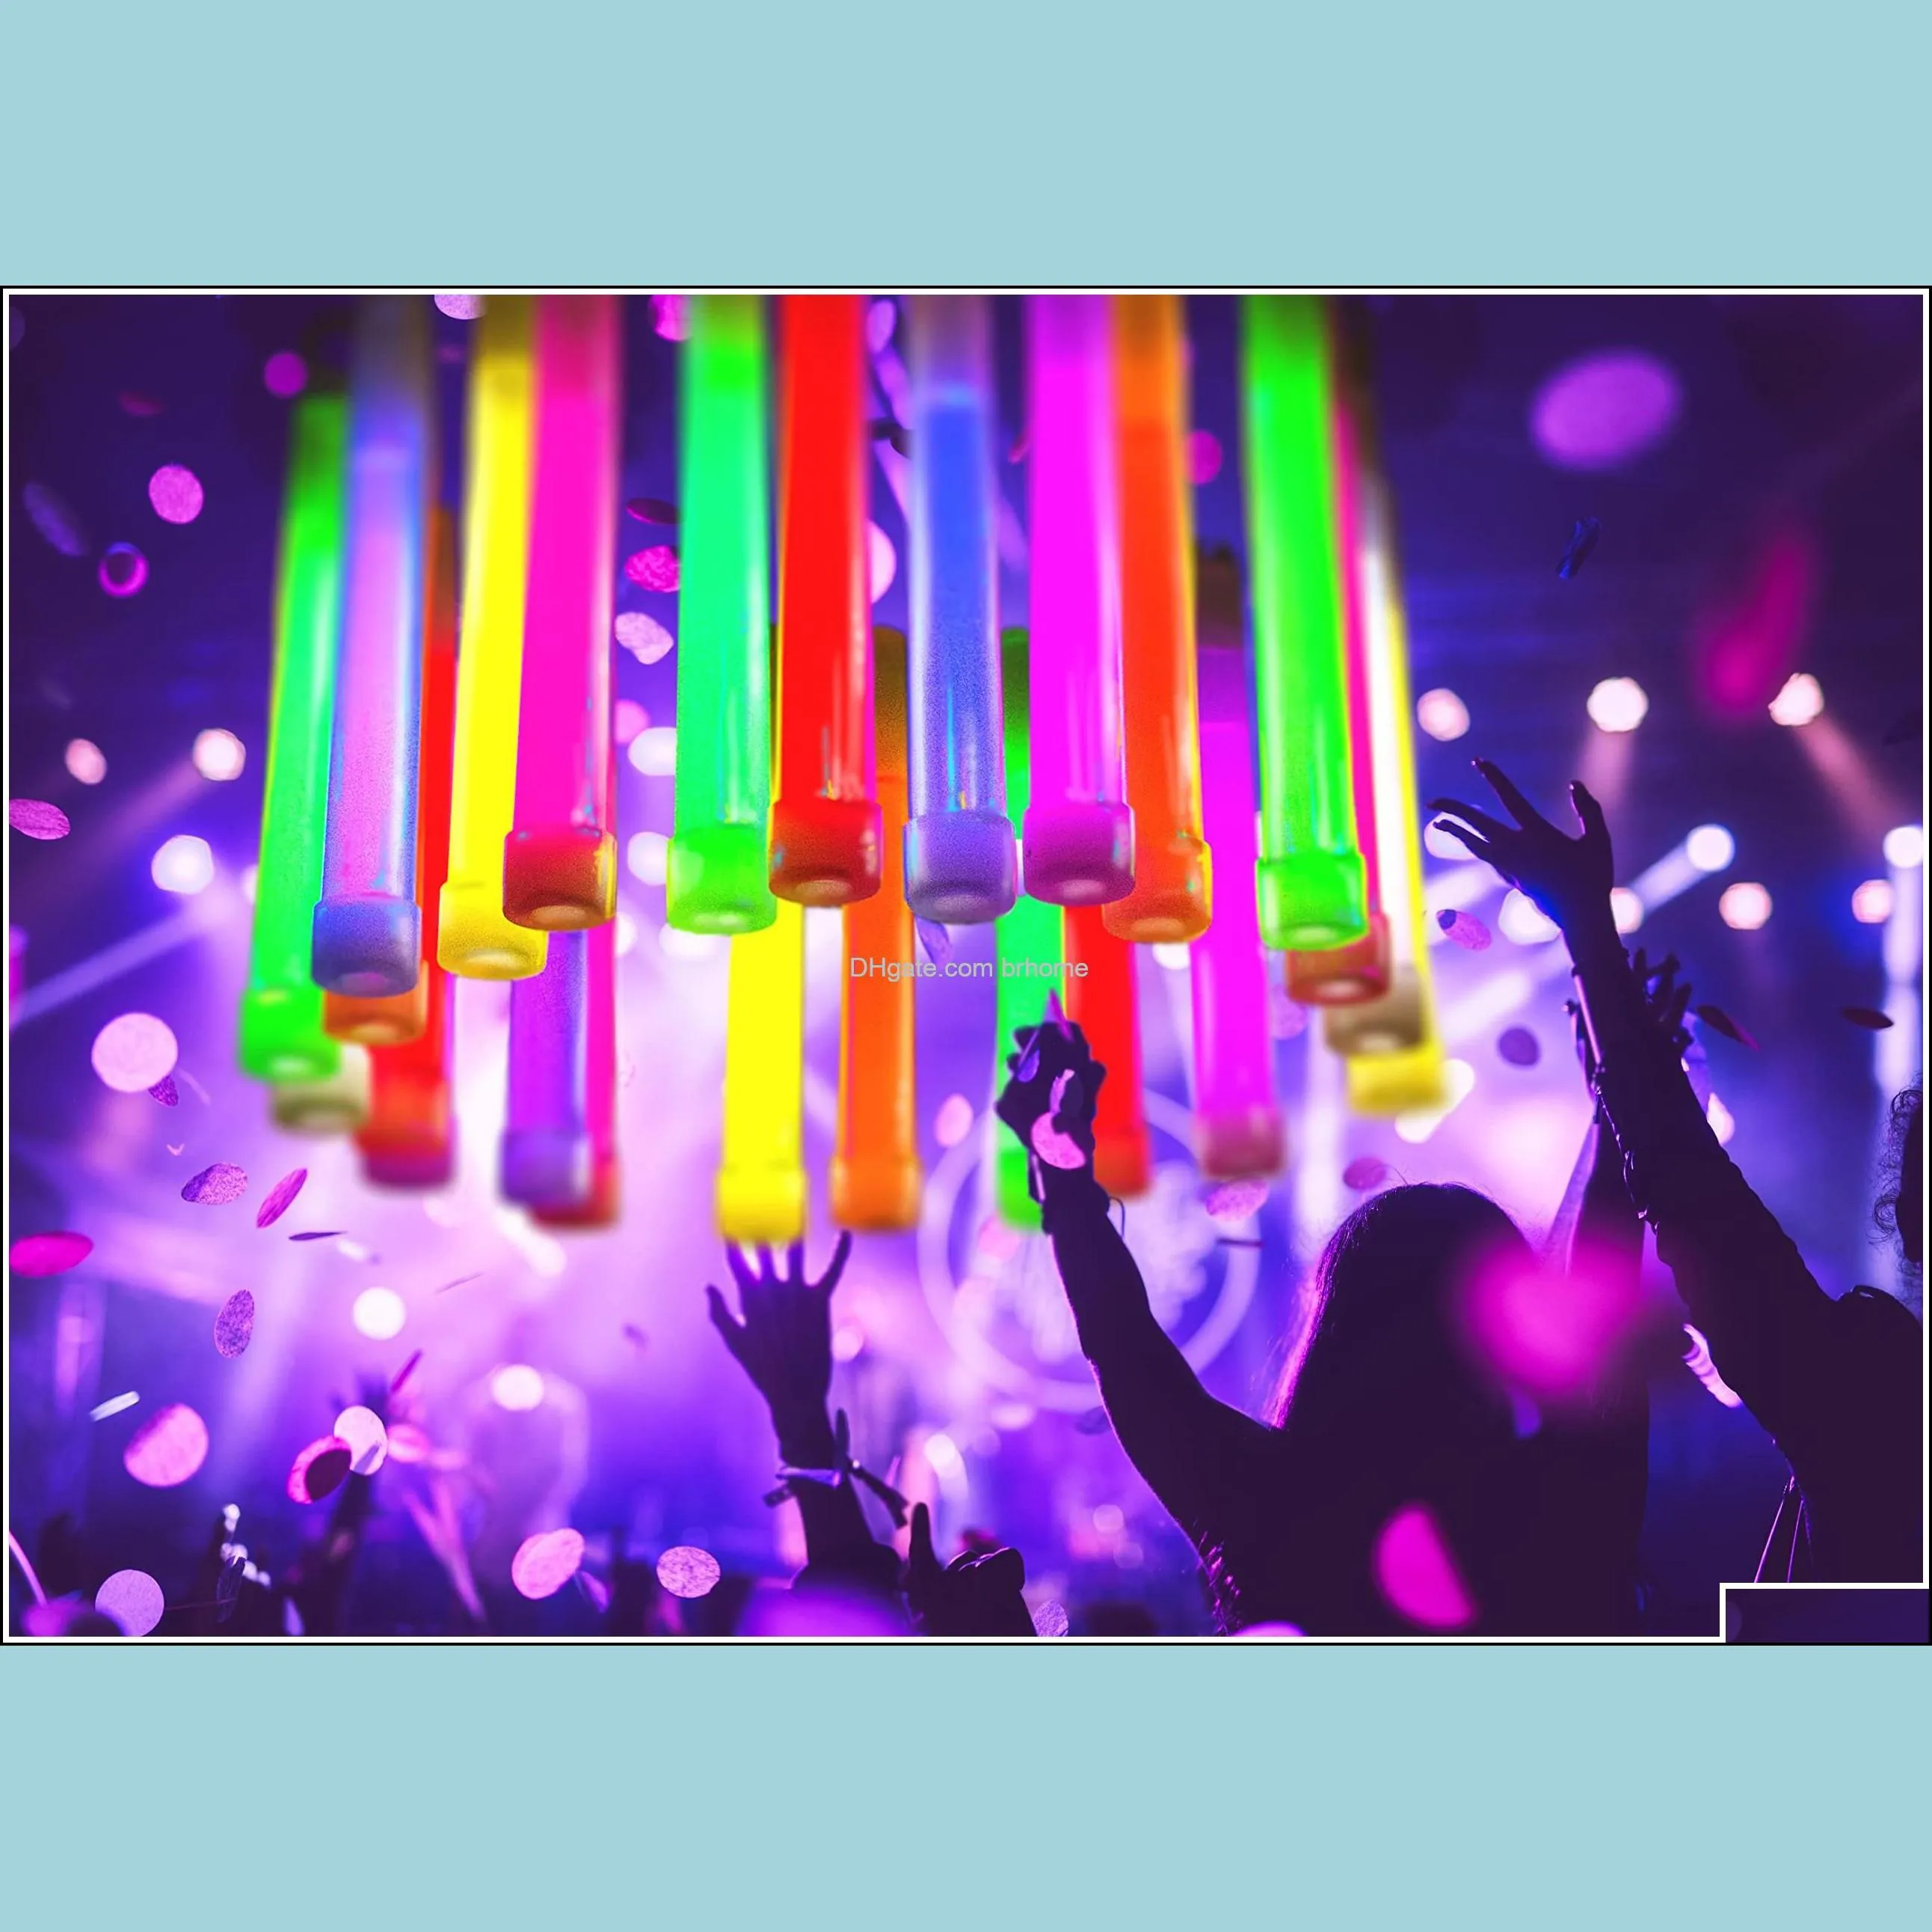 Party Decoration Glow Sticks Supplies For Kids And Adts 25Pk 6 Inch Bk Light Up Favors In The Dark Decorations Waterproof Nont Brhome